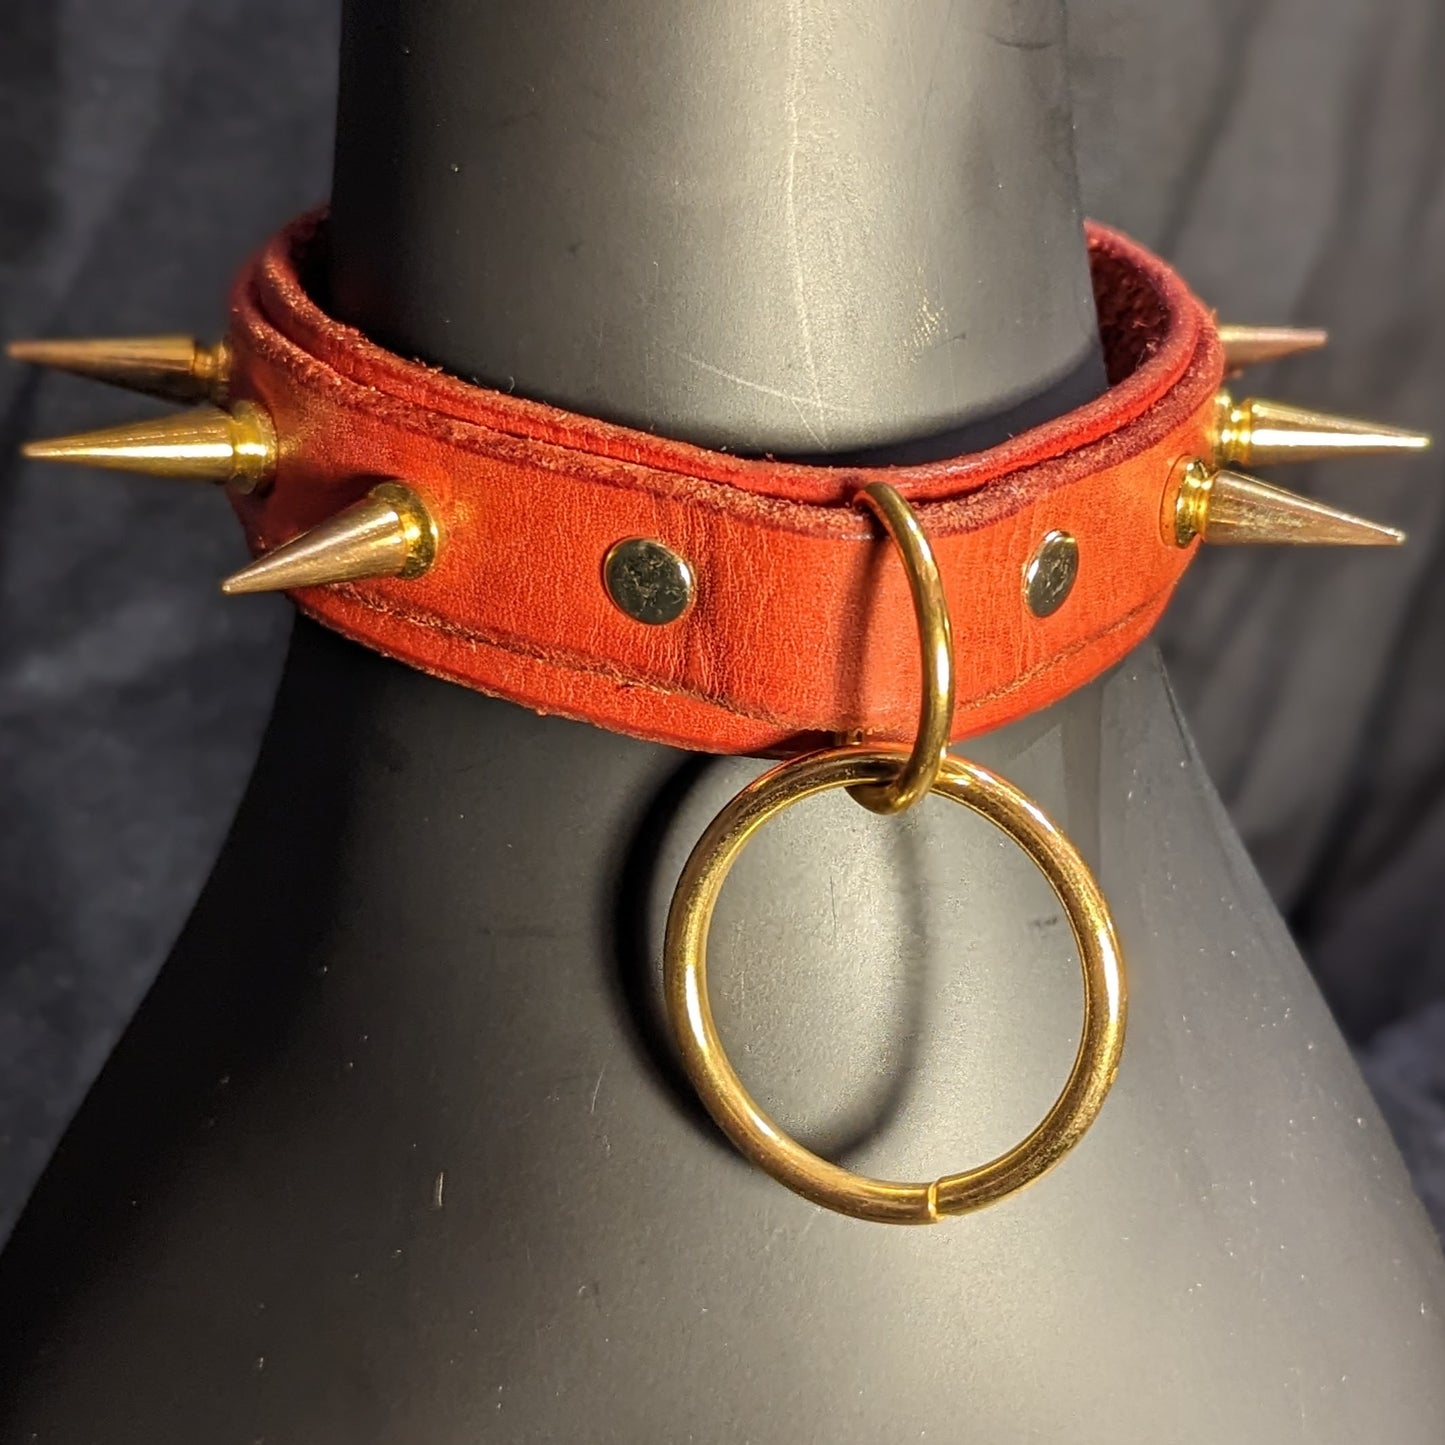 Red spiked collar by Smell My Leather. This collar has two layers of leather with 1" spikes and gold color hardware